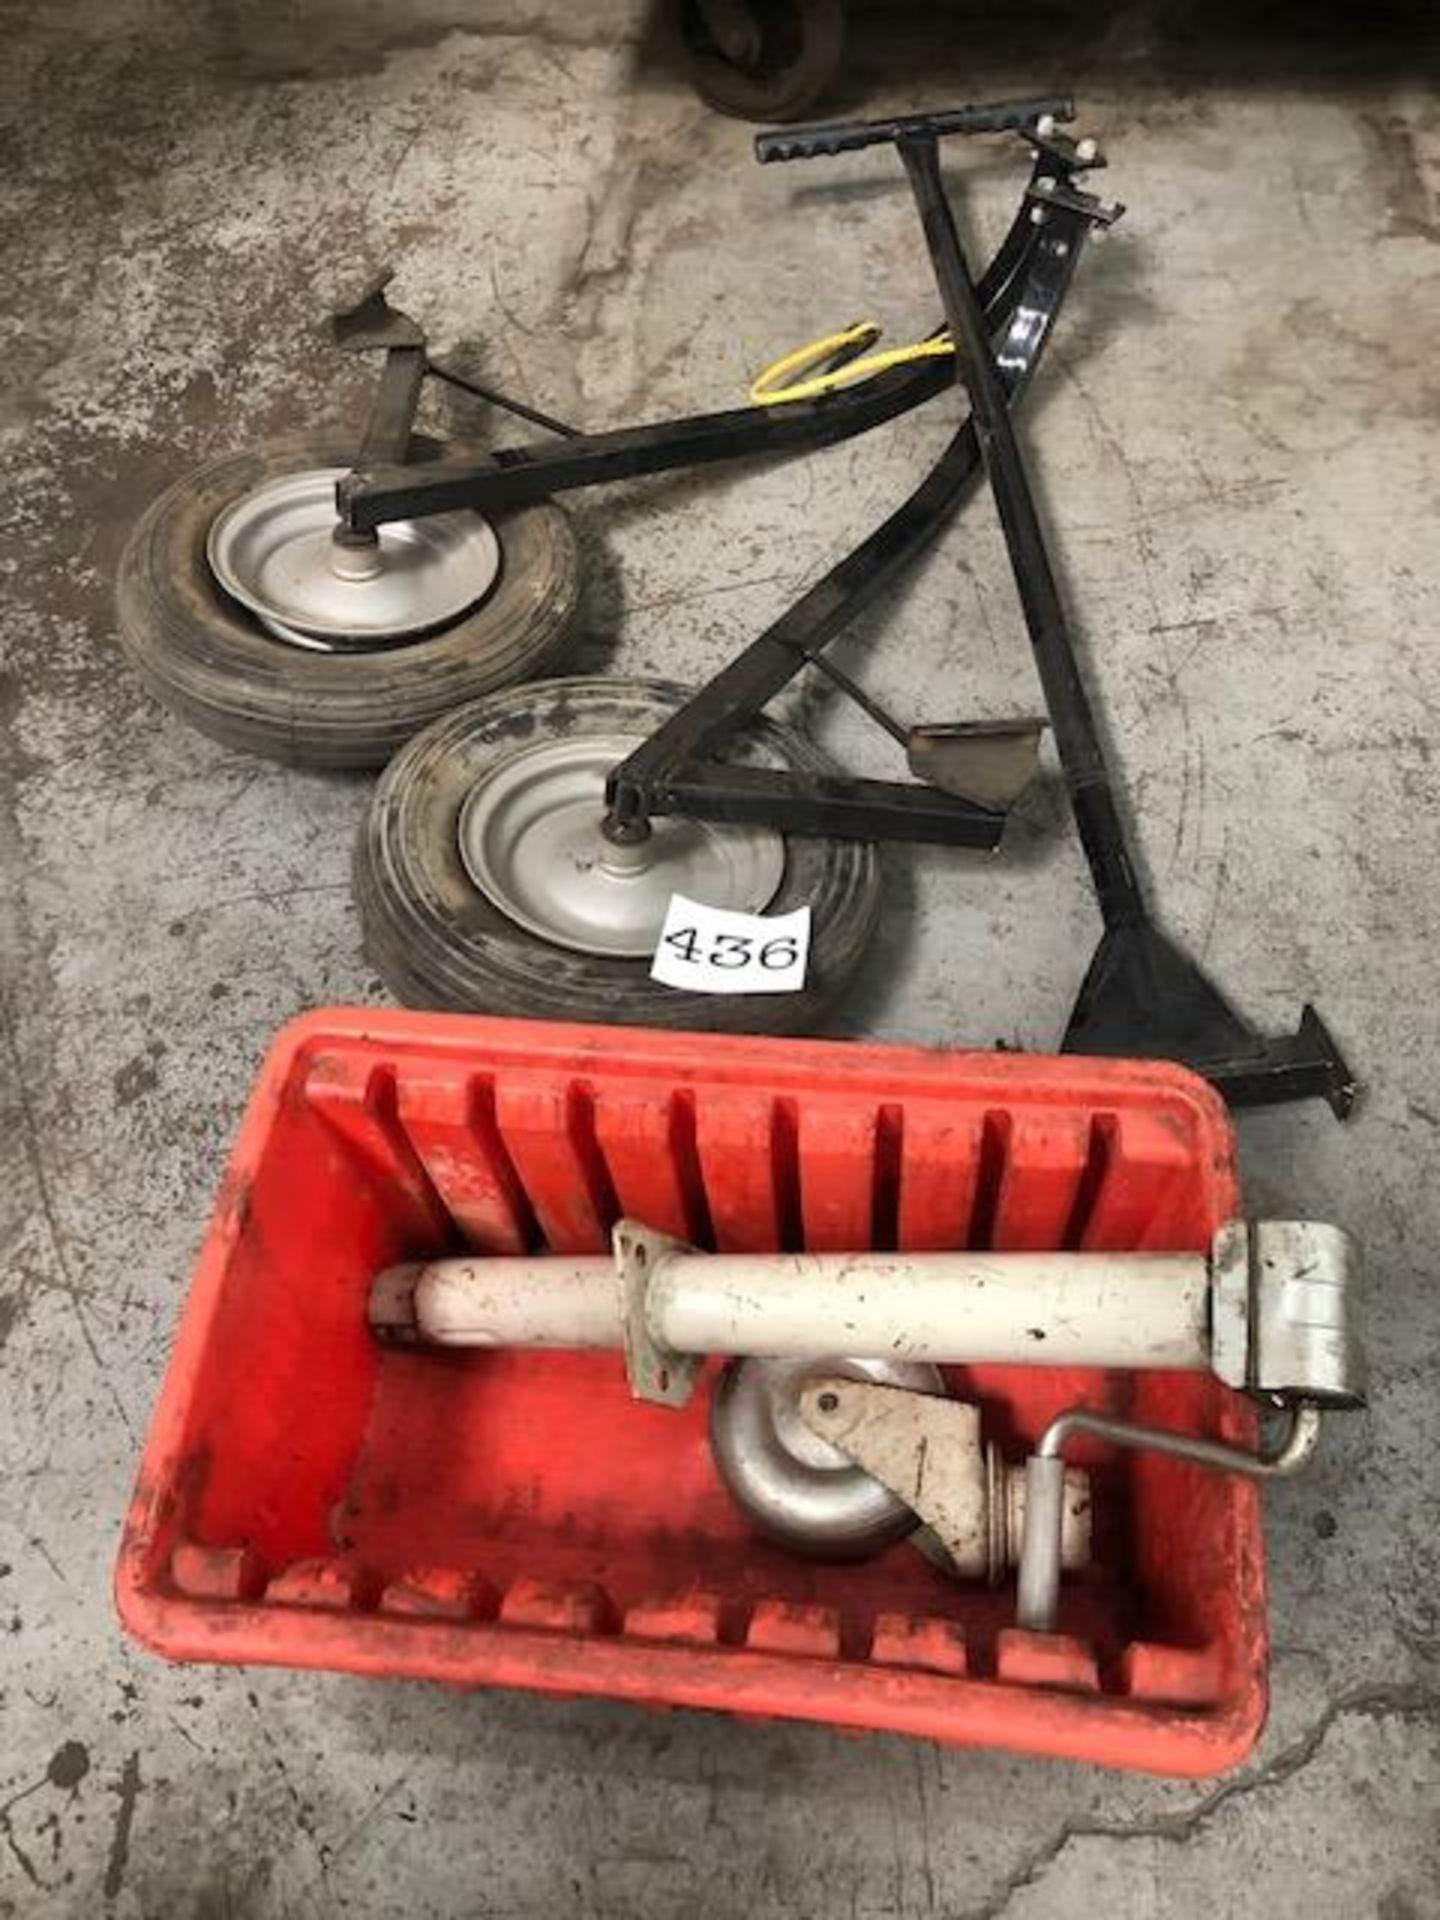 Single Vessel Trailer Hand Dolly & Miscellaneous Trailer Parts